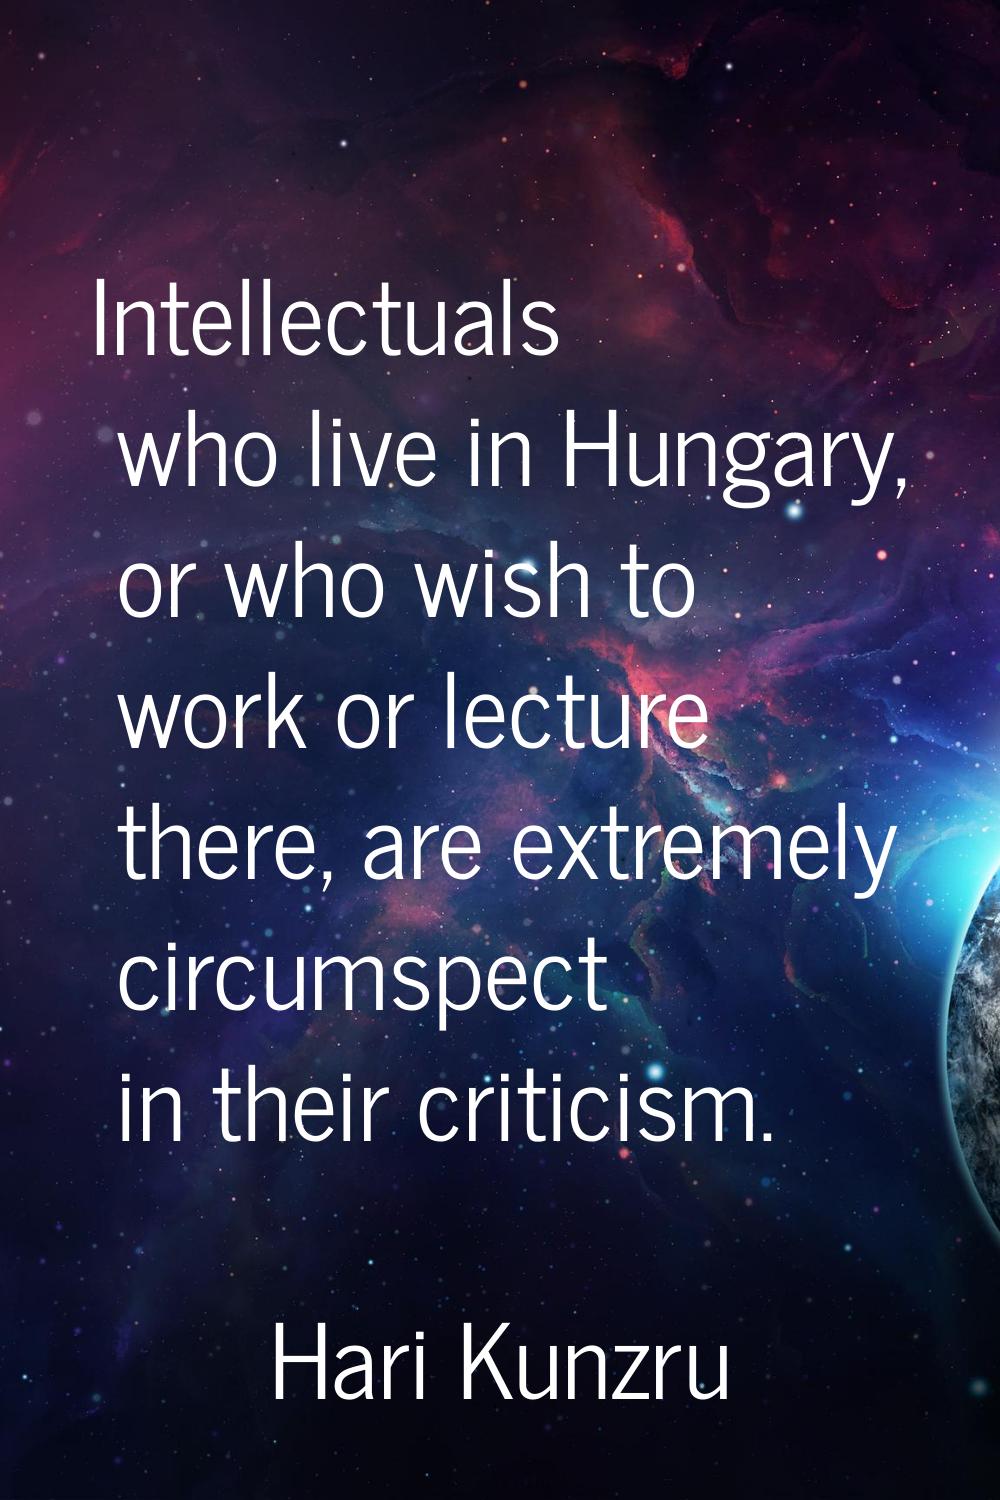 Intellectuals who live in Hungary, or who wish to work or lecture there, are extremely circumspect 